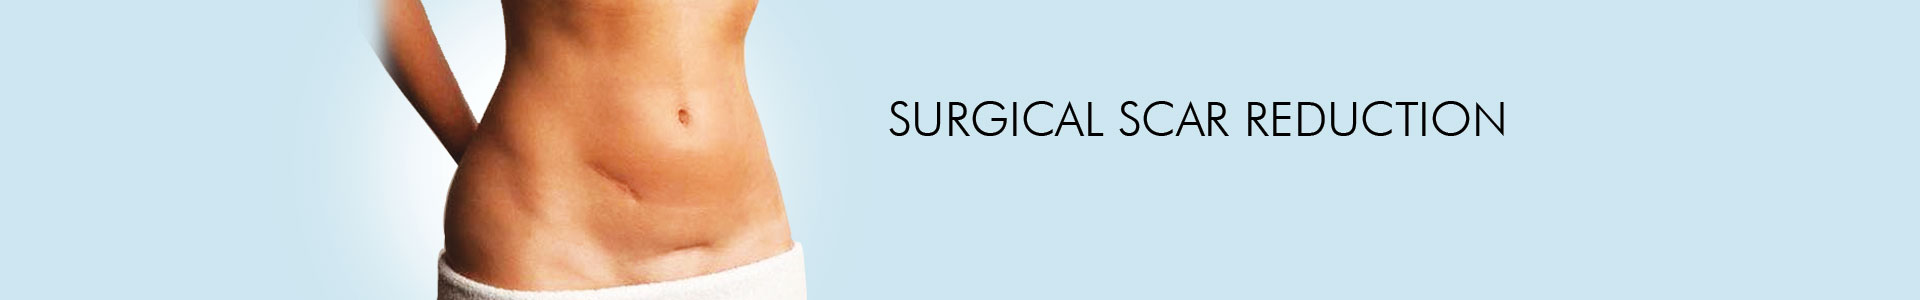 Surgical Scar Reduction